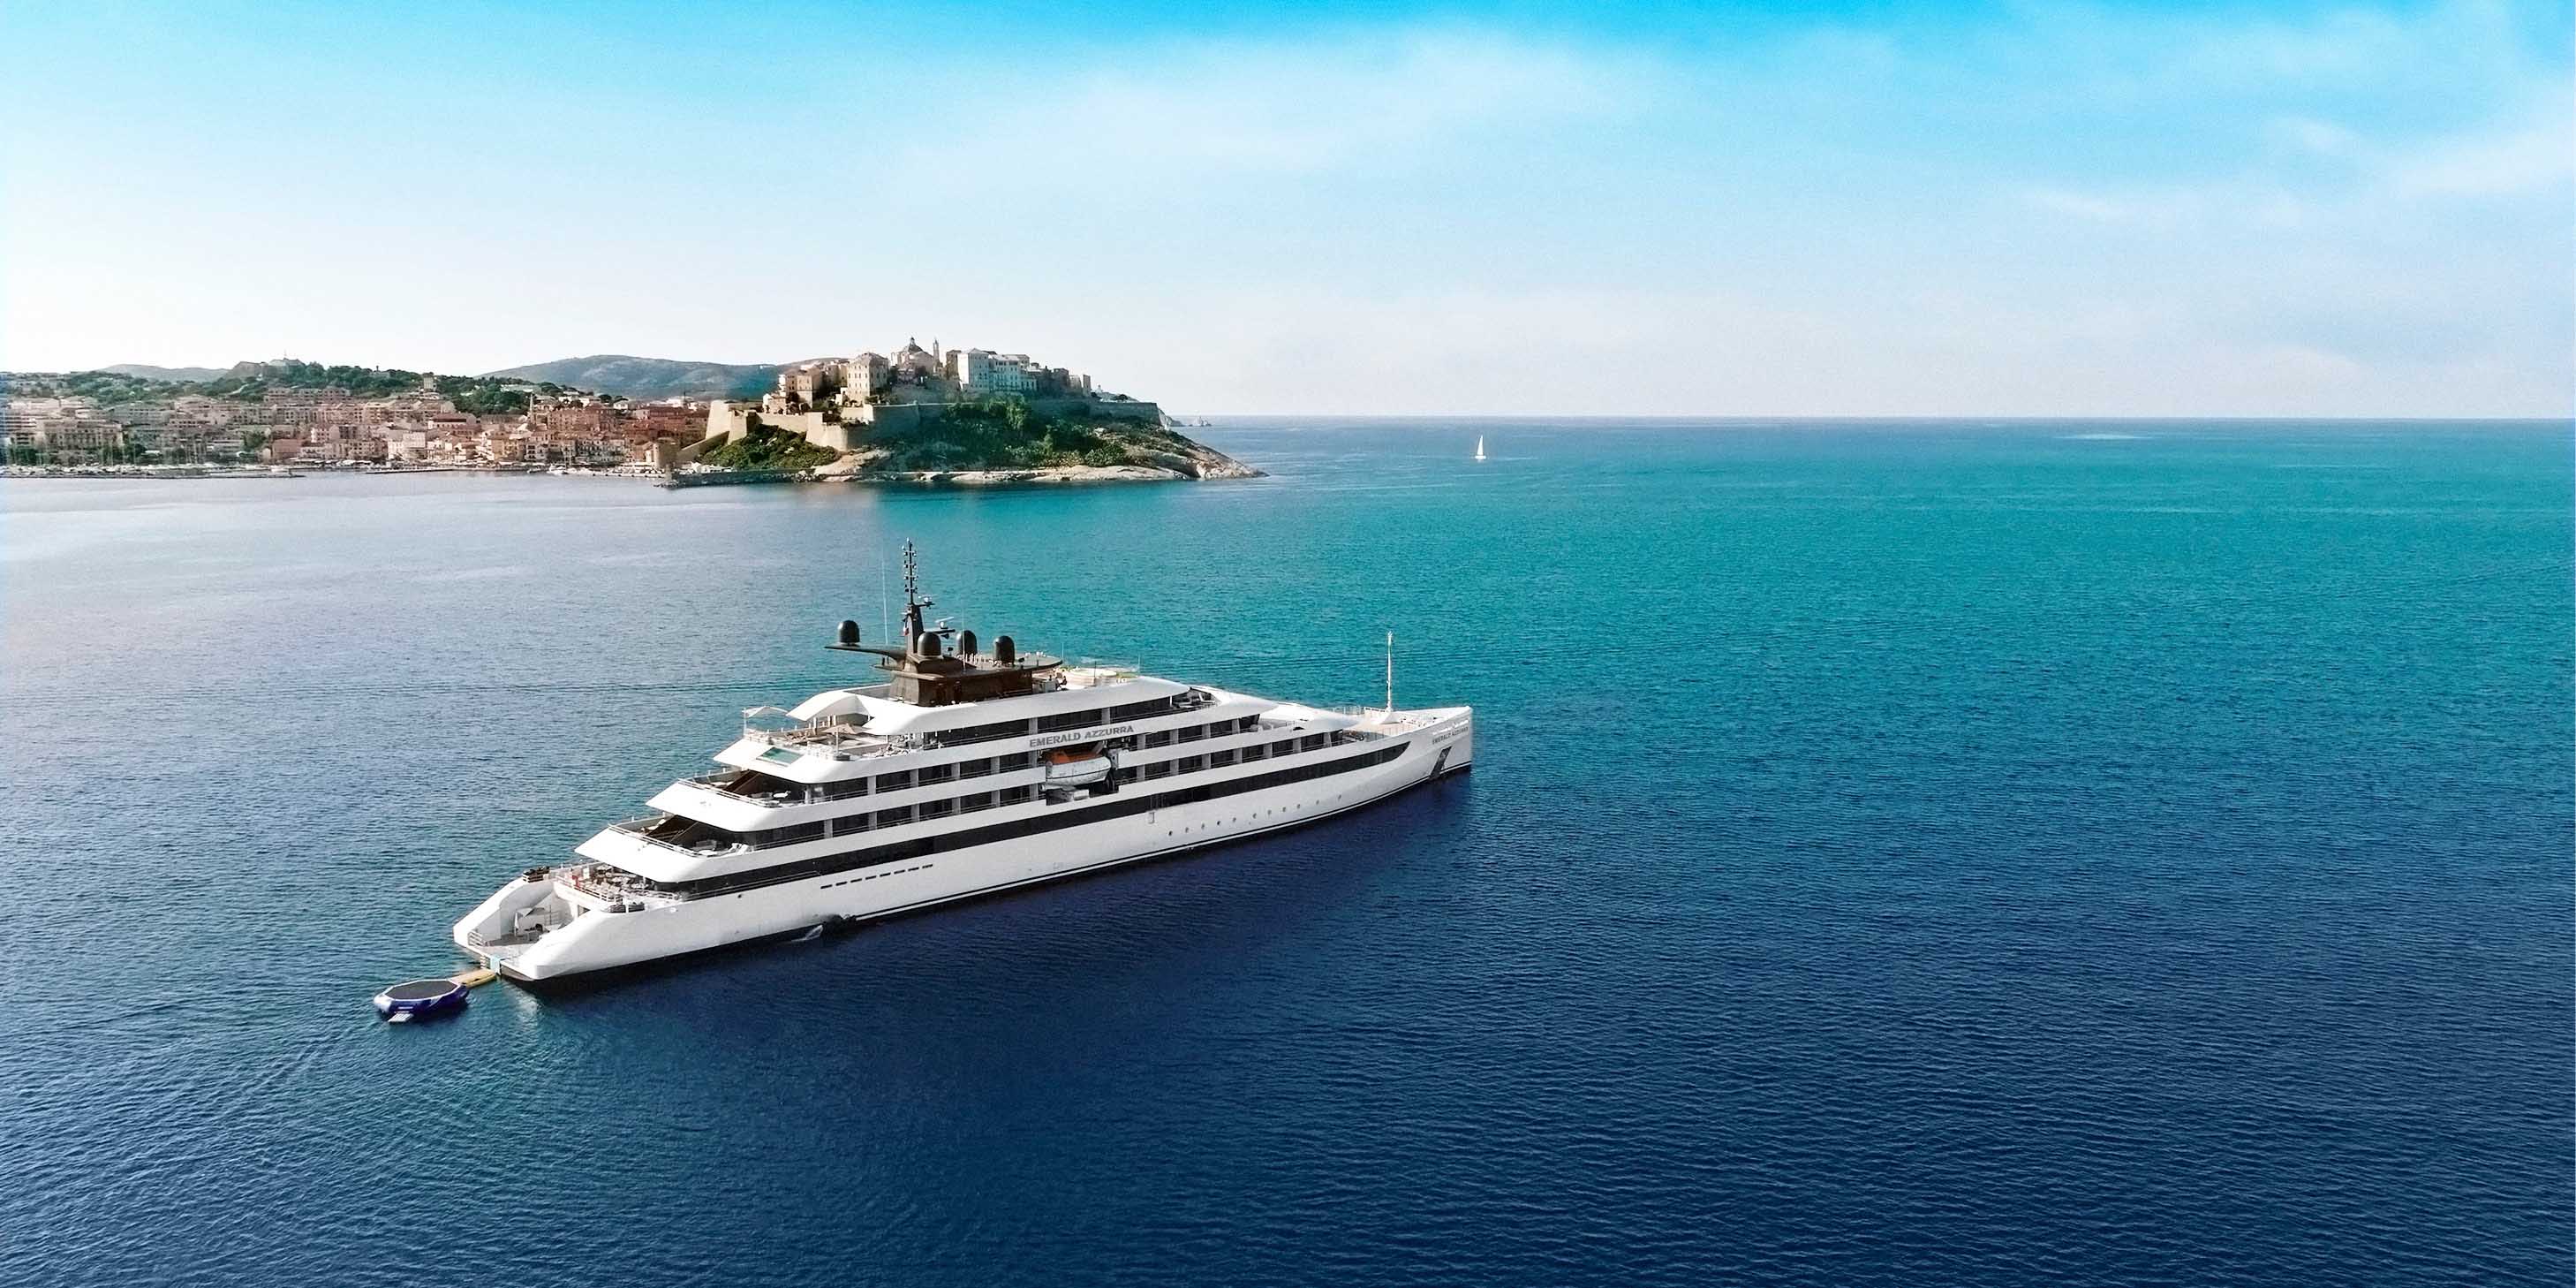 Emerald Cruises luxury yacht sailing along azure blue waters past the medieval town of Calvi nestled on the coastline on Corsica